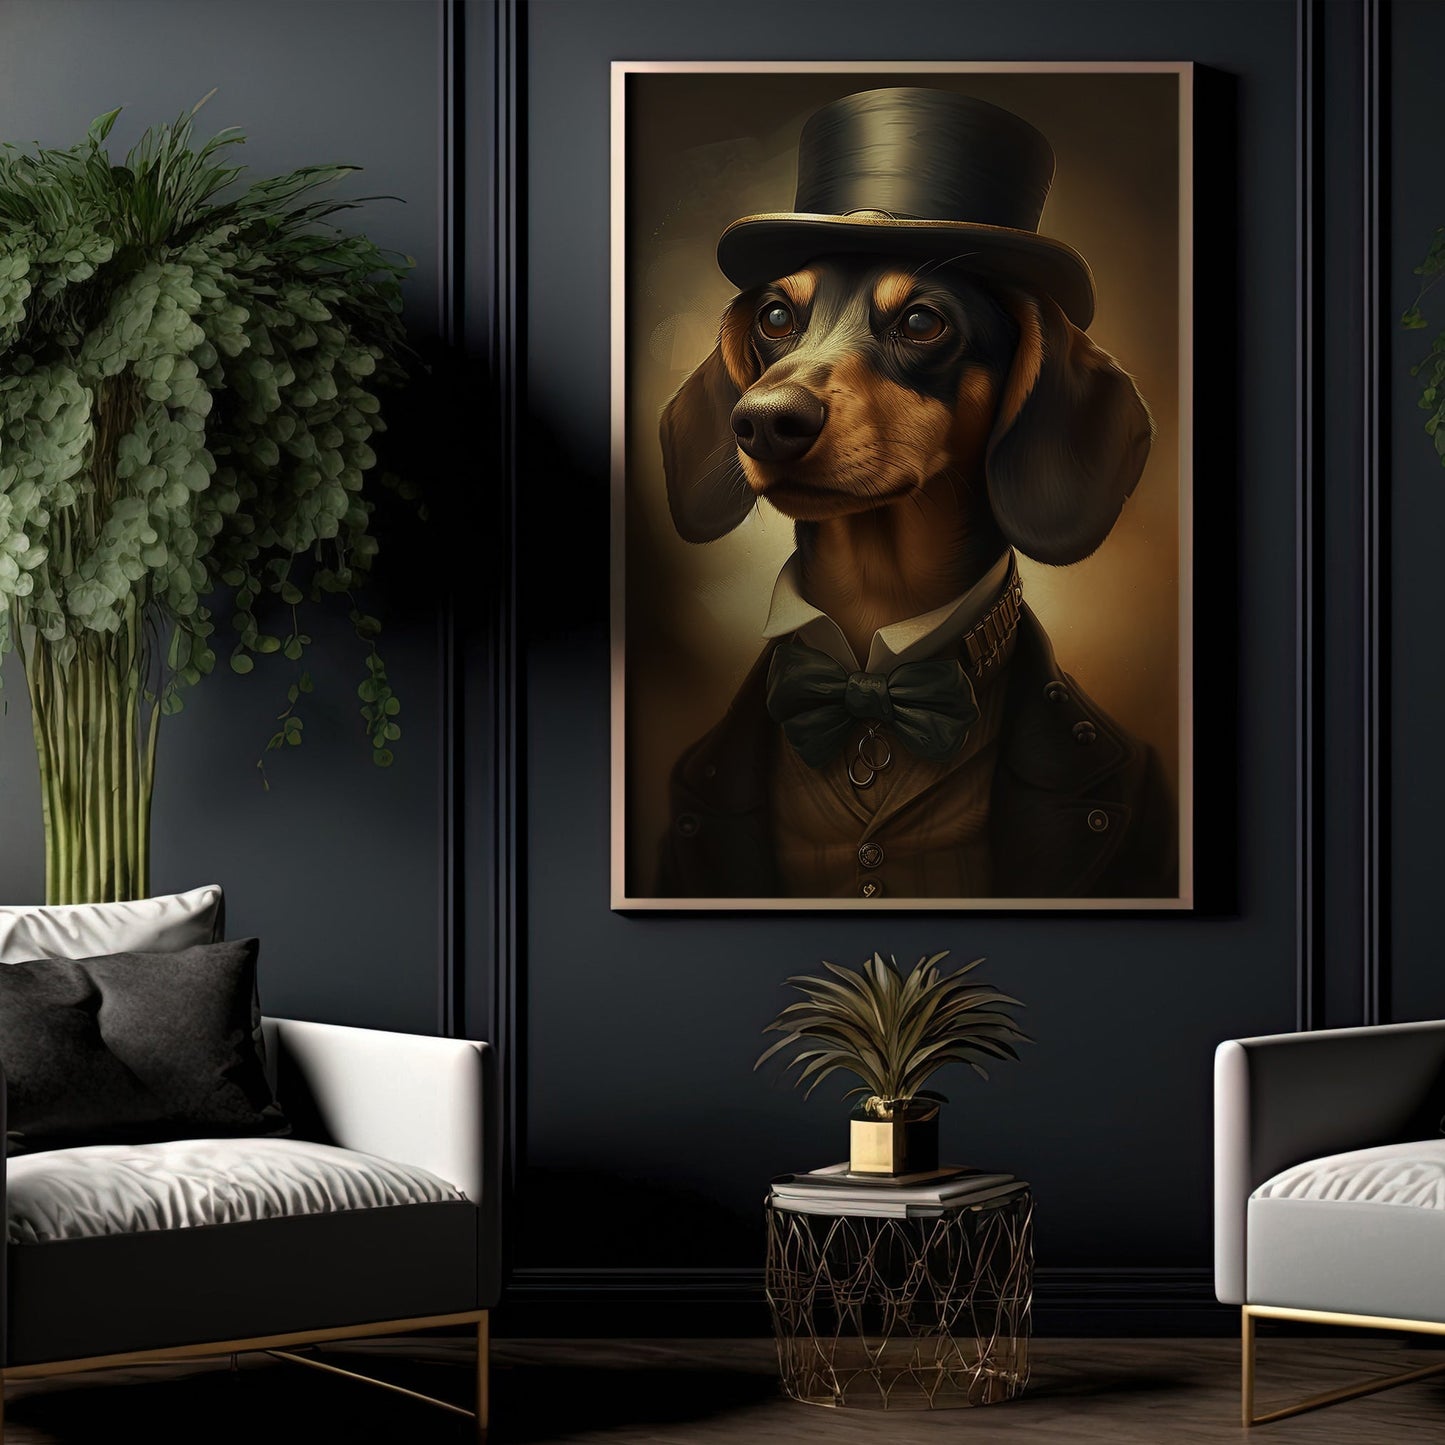 Gentlemen Dachshund In Victorian Style, Victorian Dog Canvas Painting, Victorian Animal Wall Art Decor, Poster Gift For Dachshund Dog Lovers